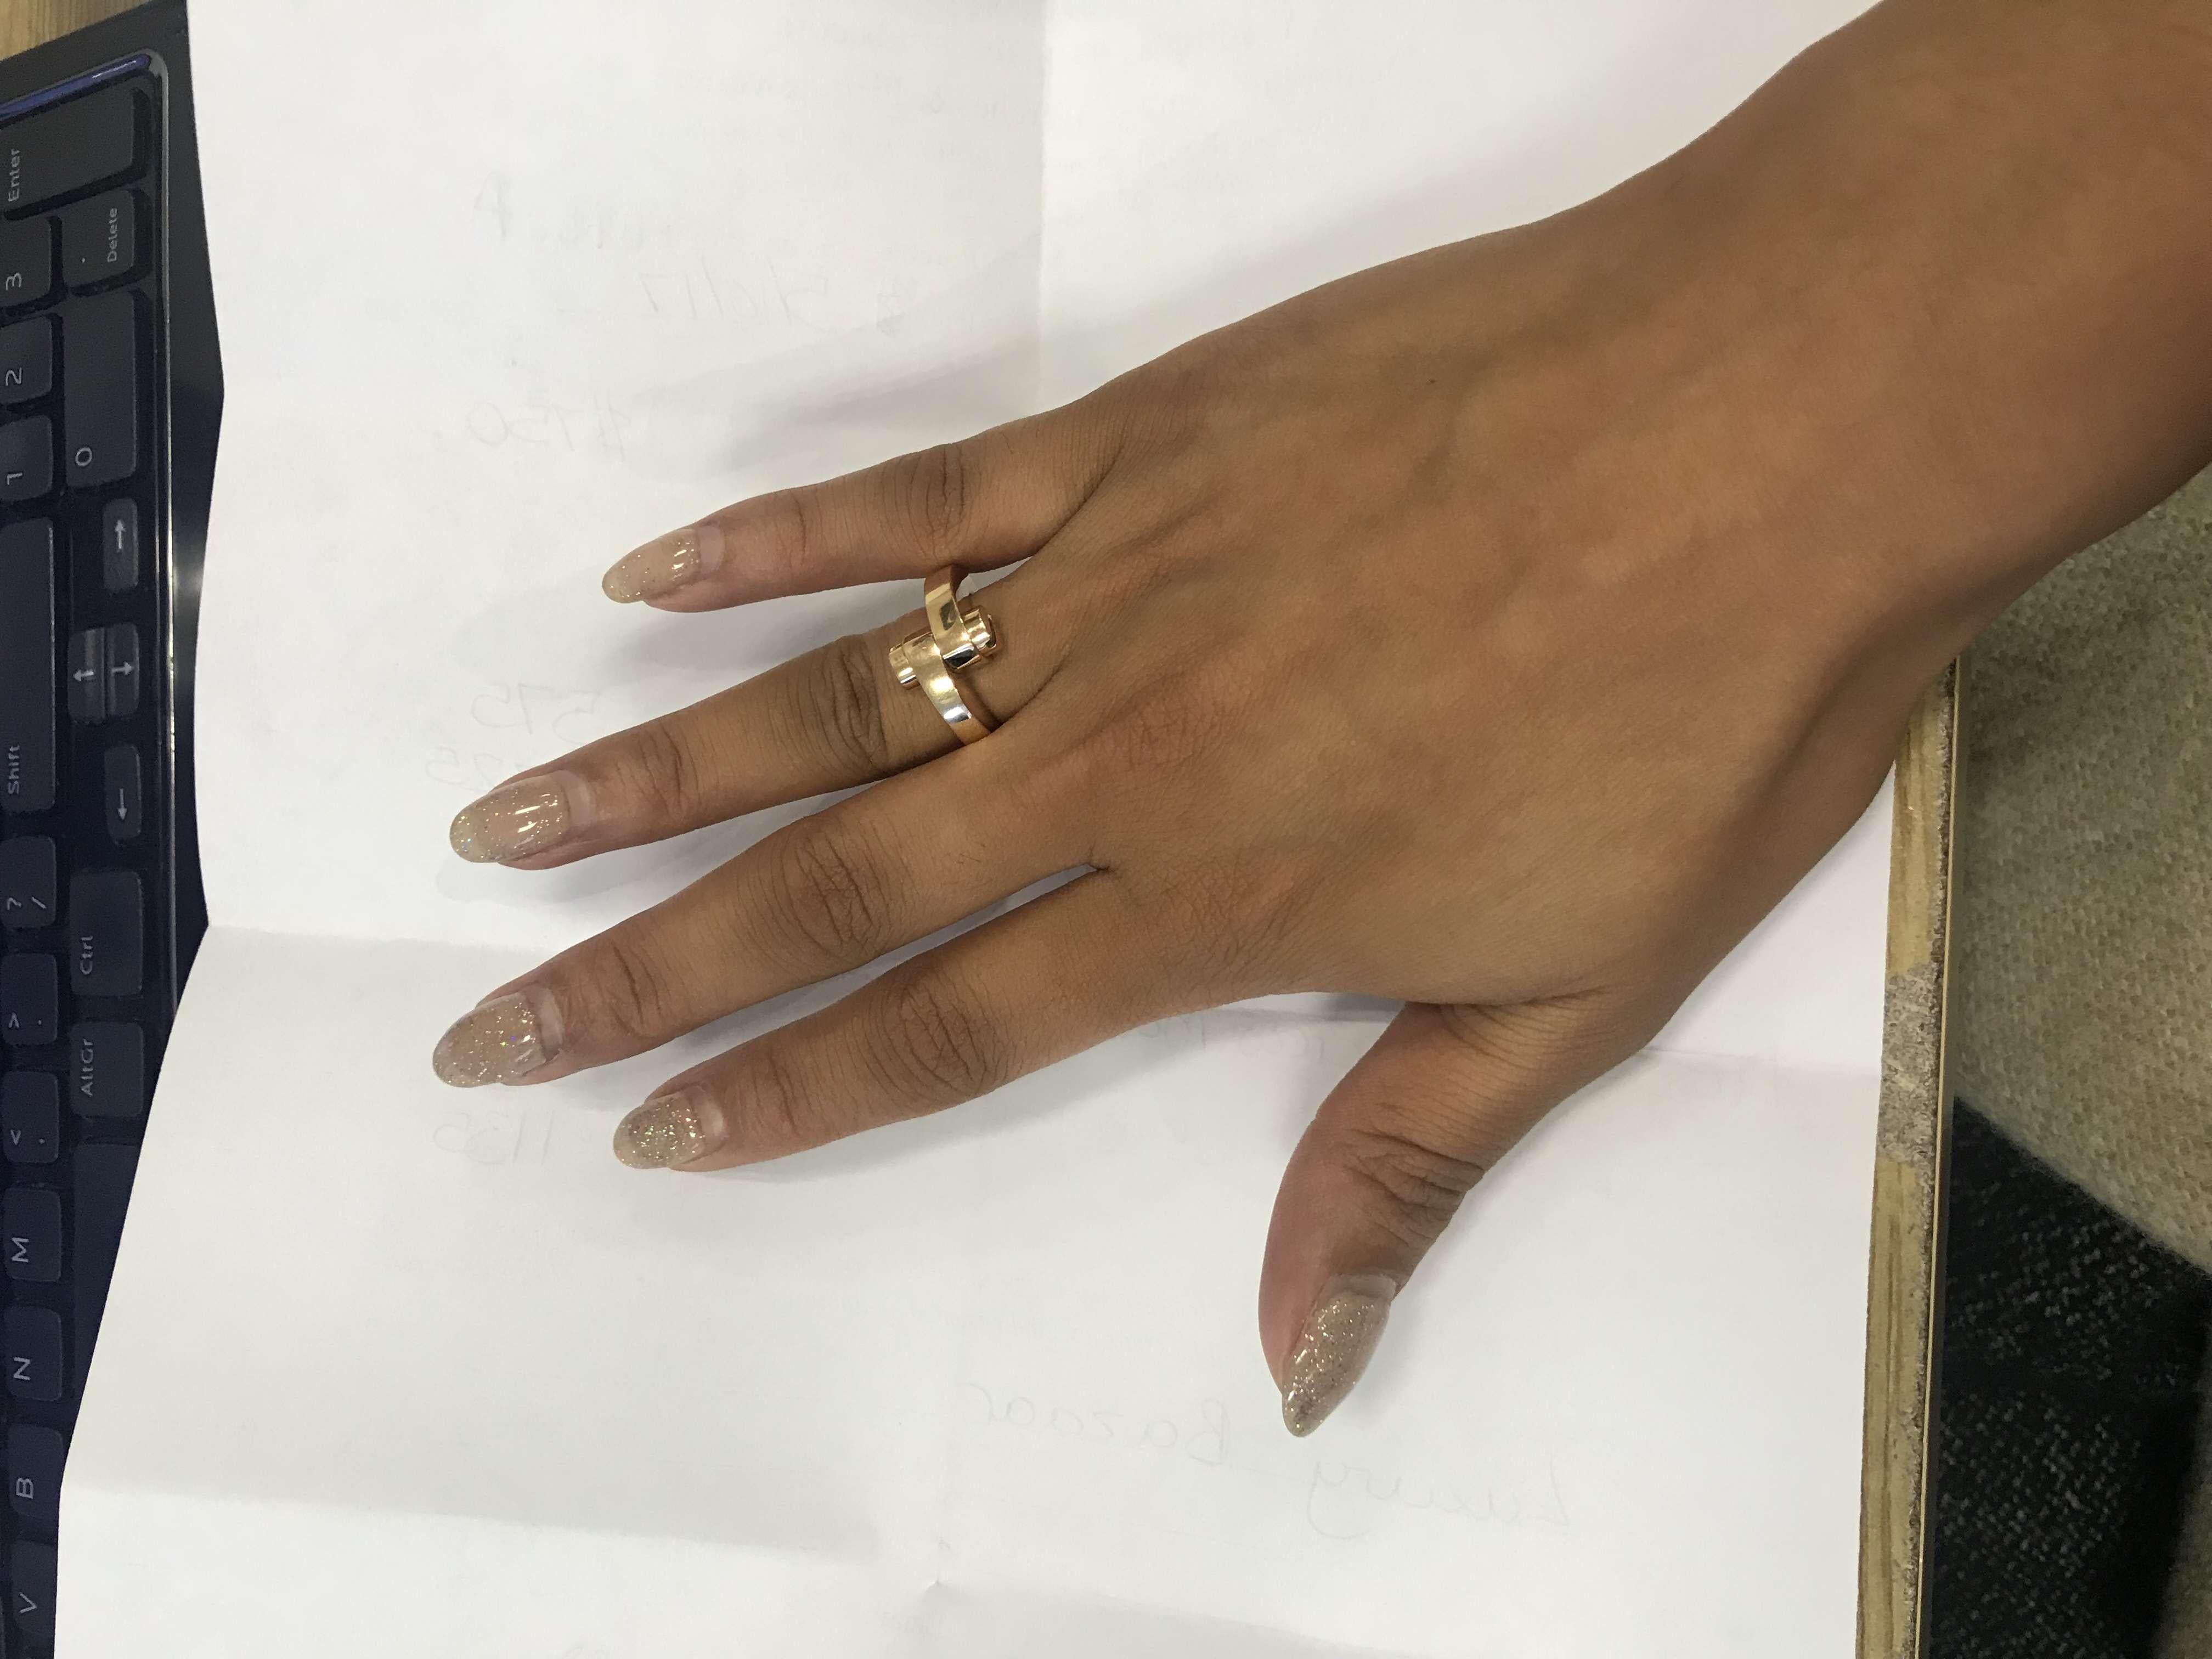 A trendy 18k rose gold Cartier ring from the Menotte collection. The ring comprises of the iconic motif with two screw motif terminations. The ring is a size UK I/US 4/EU 47.5 and has a gross weight of 13.10 grams.

The ring comes complete with a